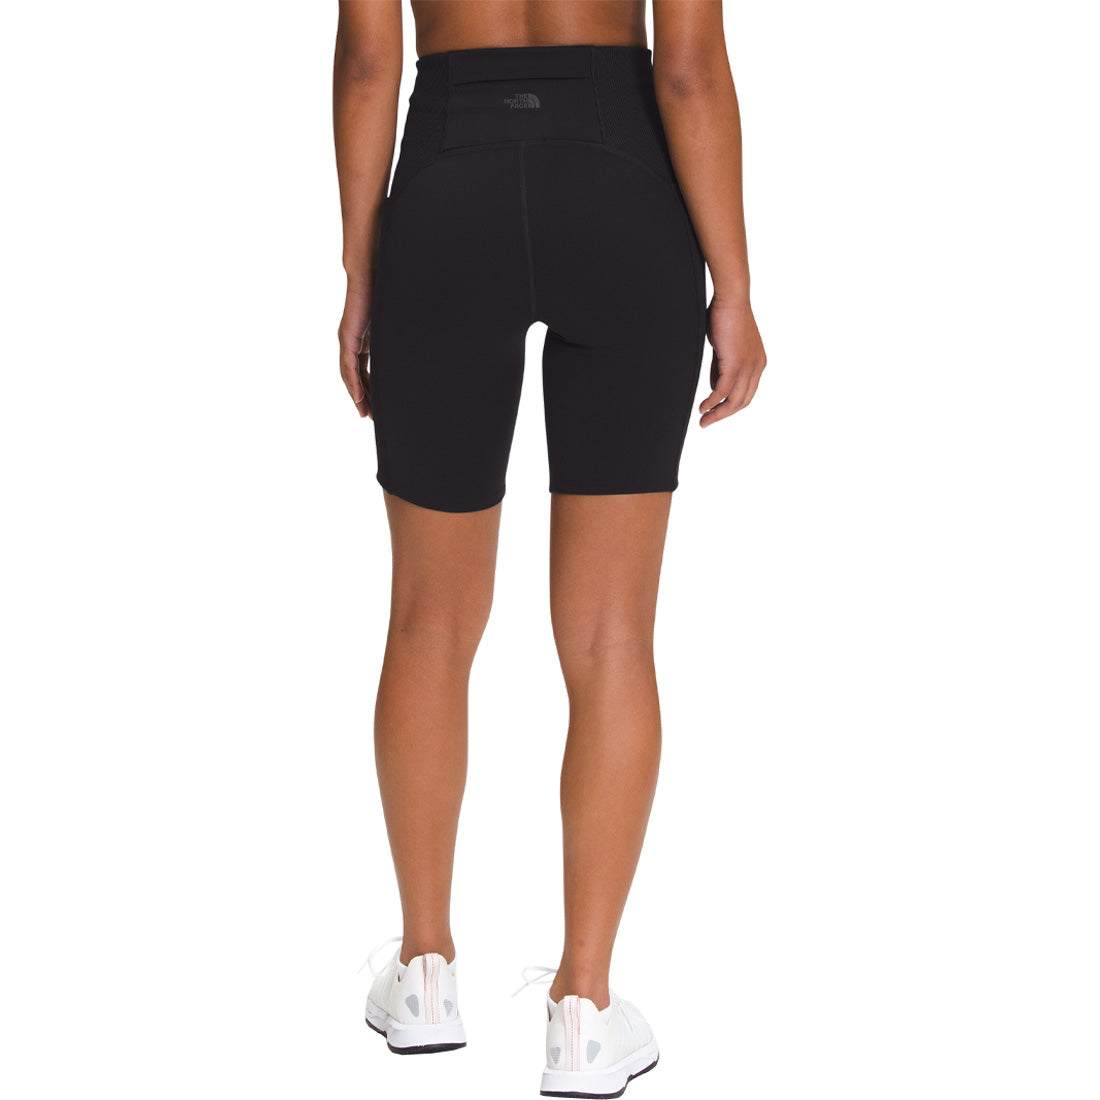 The North Face Dune Sky Tight Short 9" - Women's